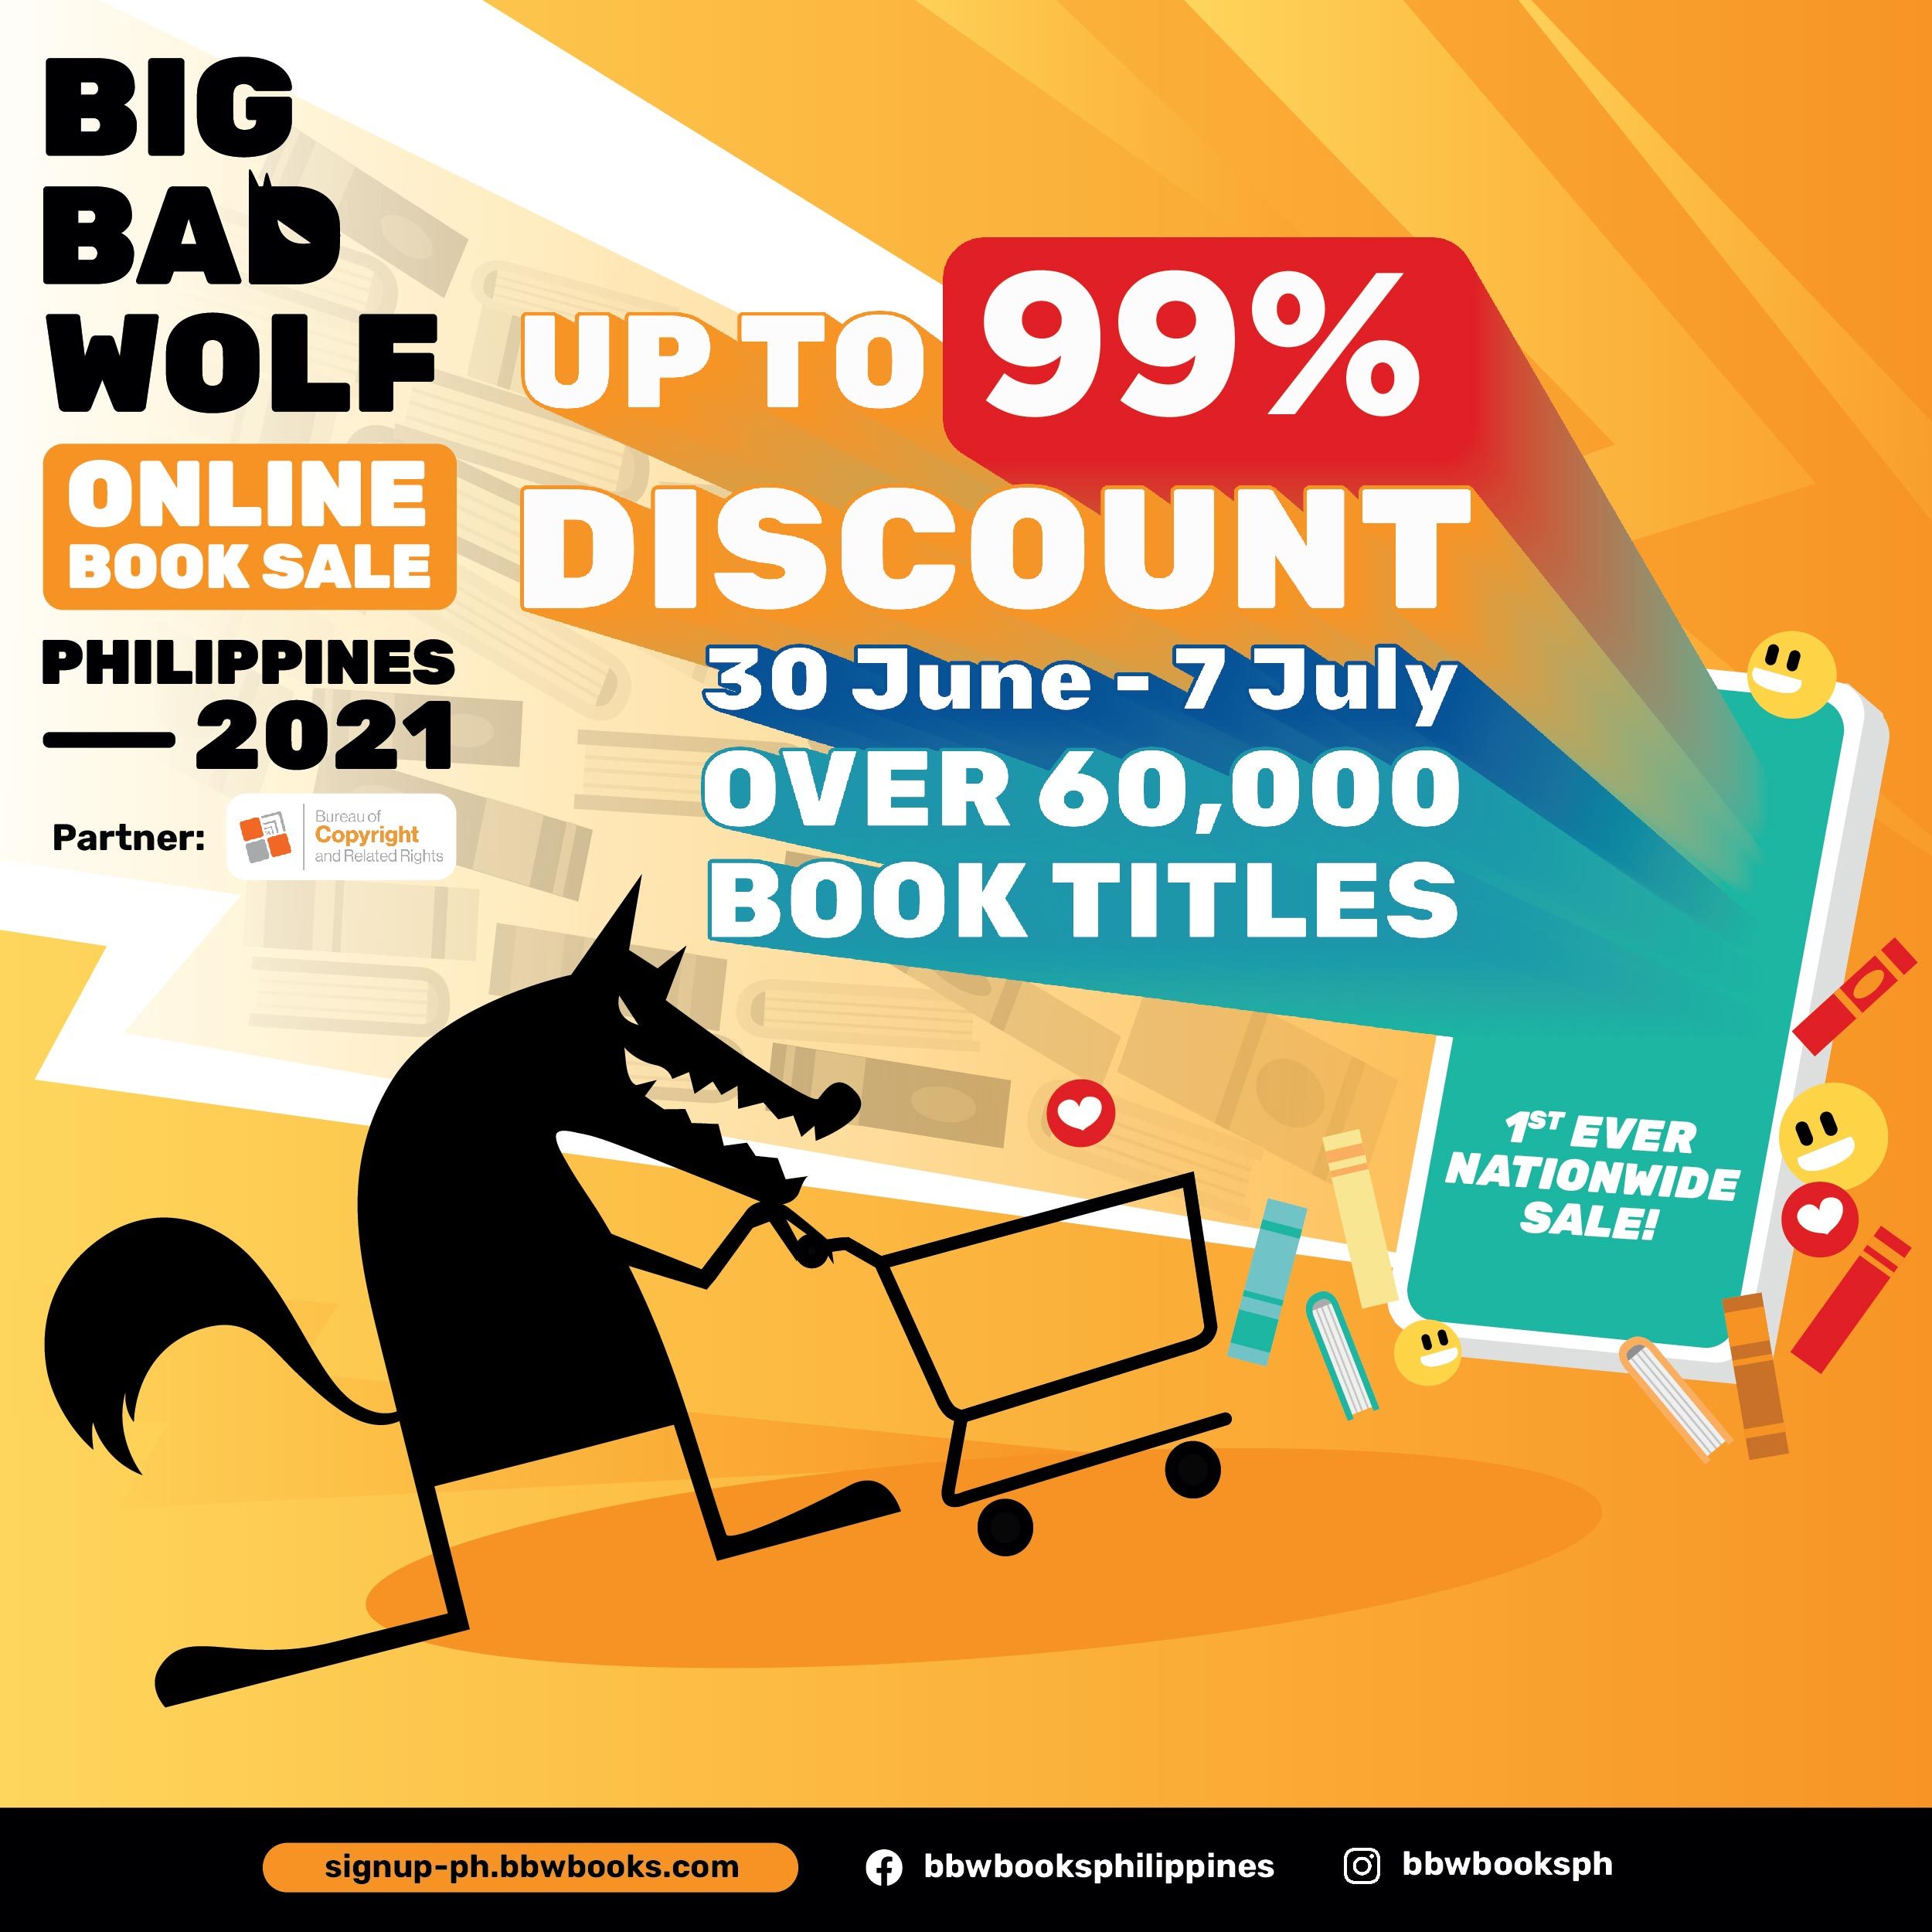 Big Bad Wolf’s book sale goes online – here’s what you should know